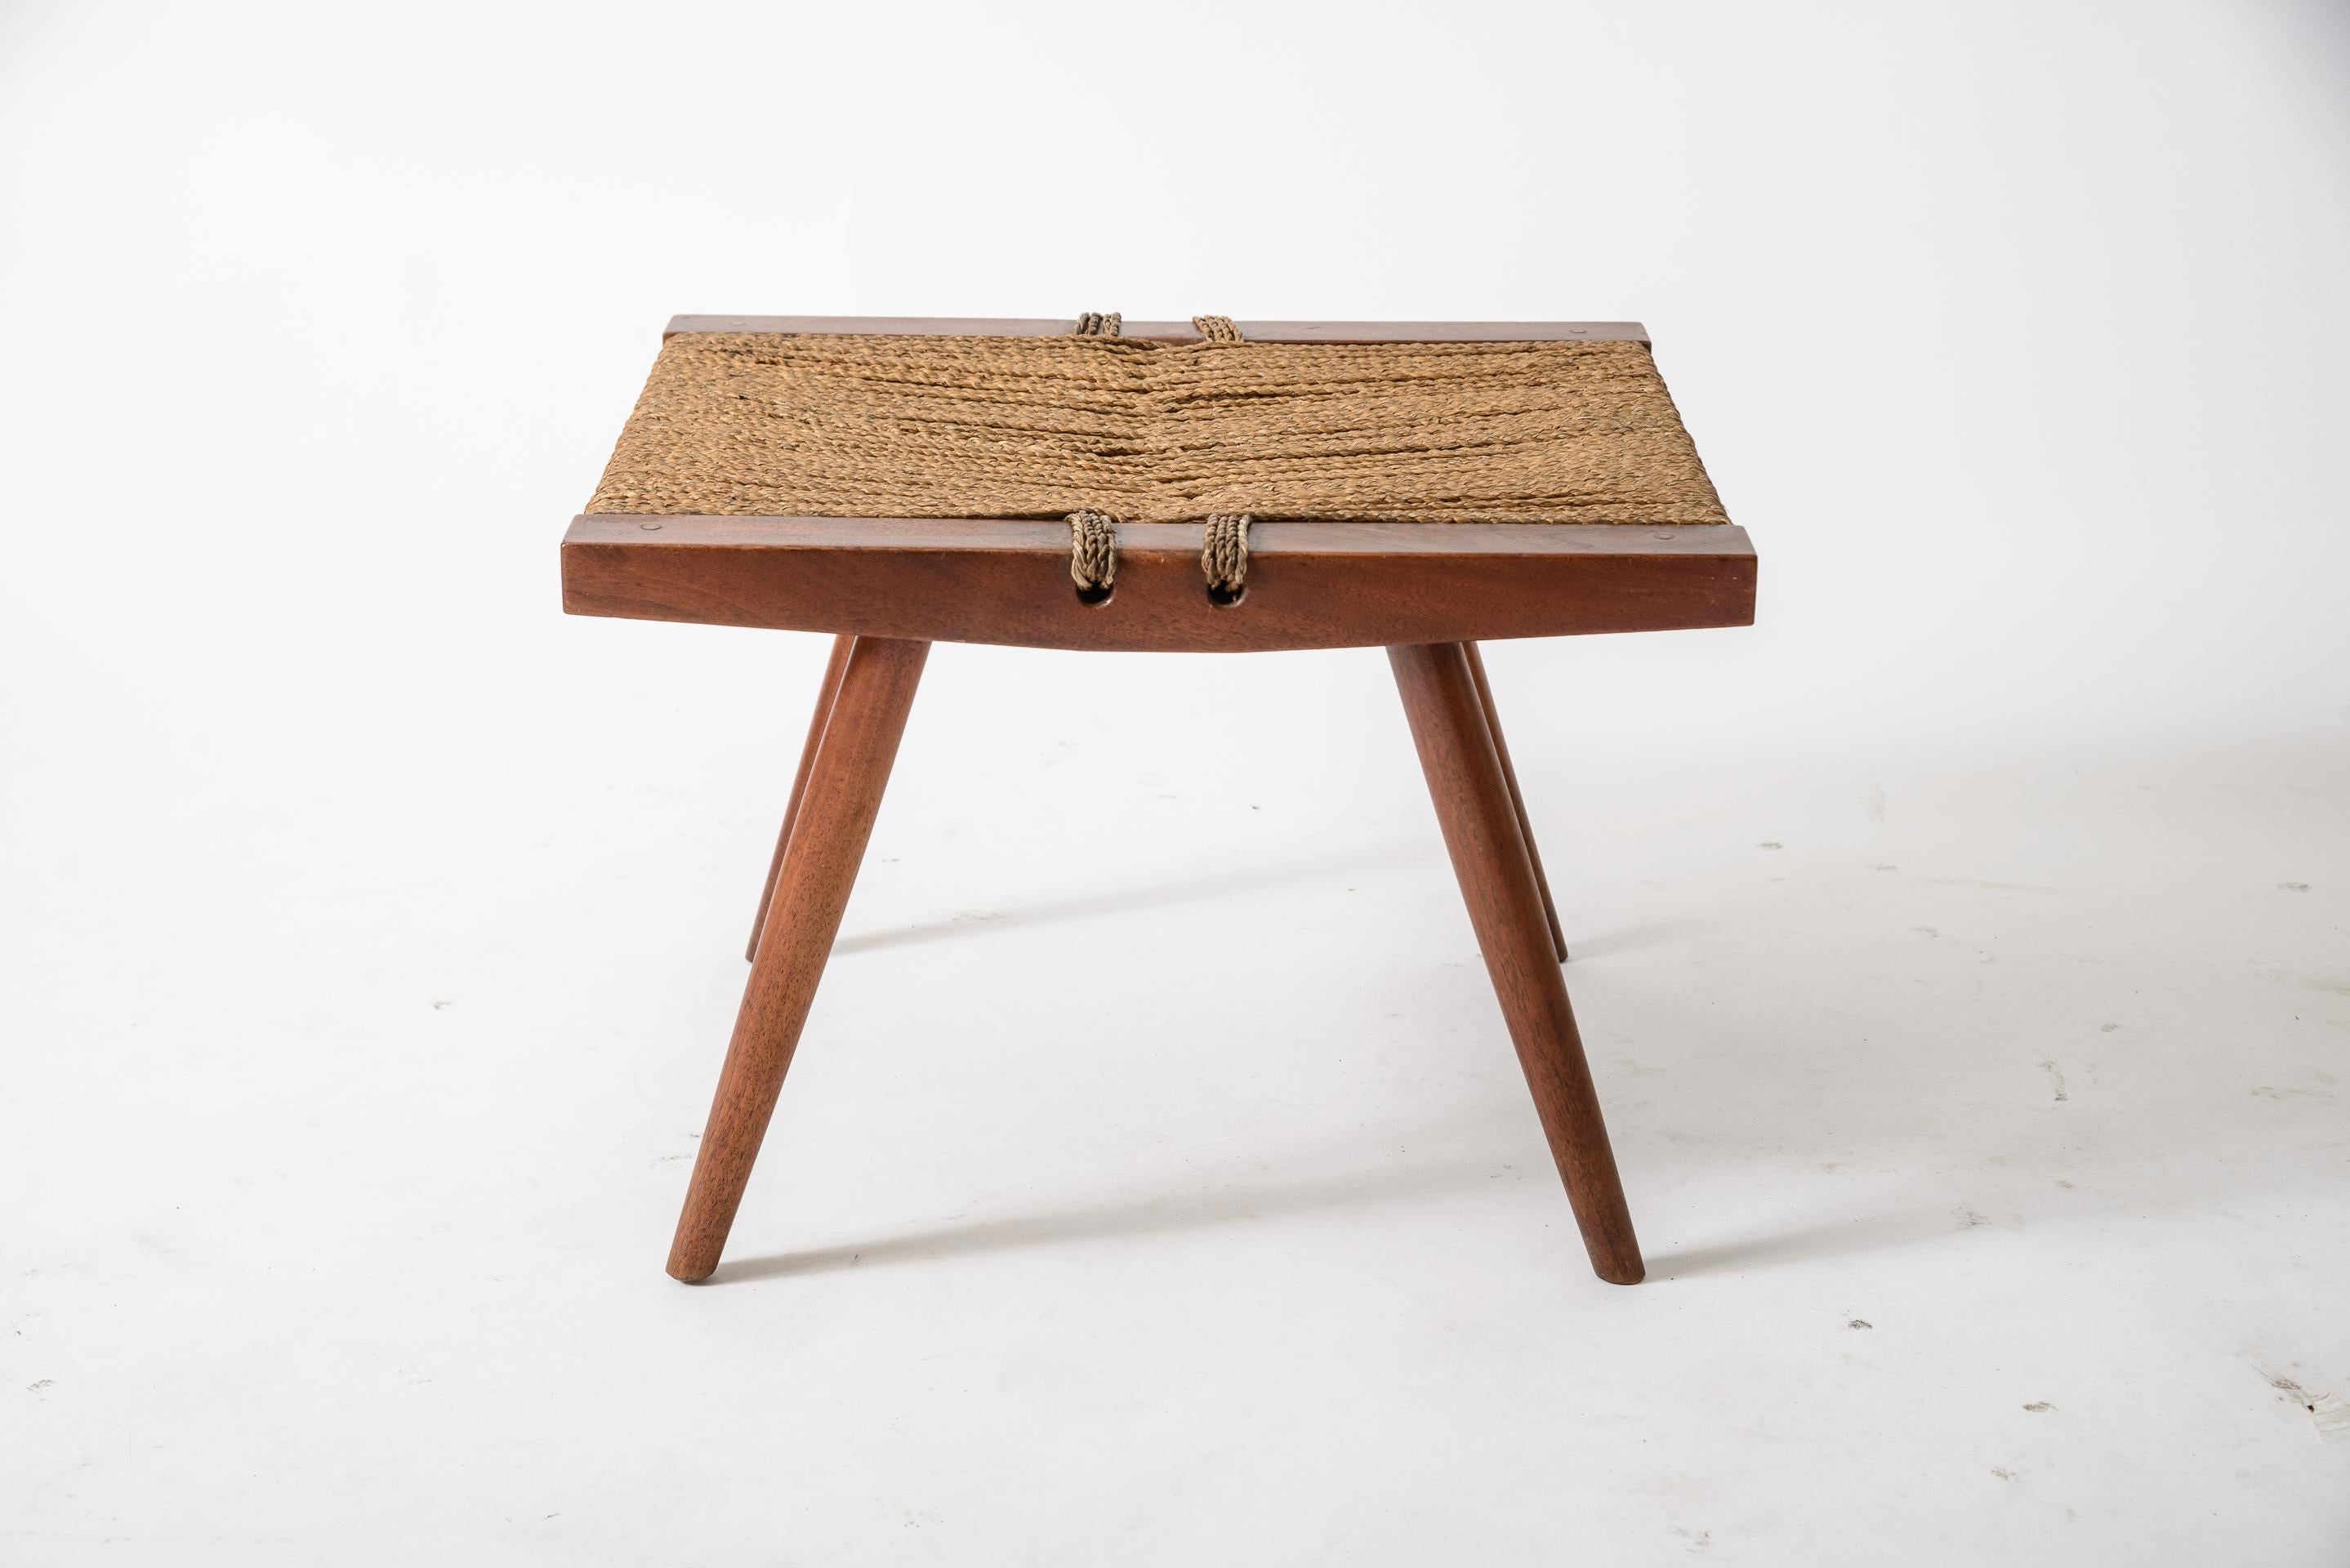 A nice Rope seat stool
Original surface
Some minor breaks in hemp seating(under the stool), but not objectionable

